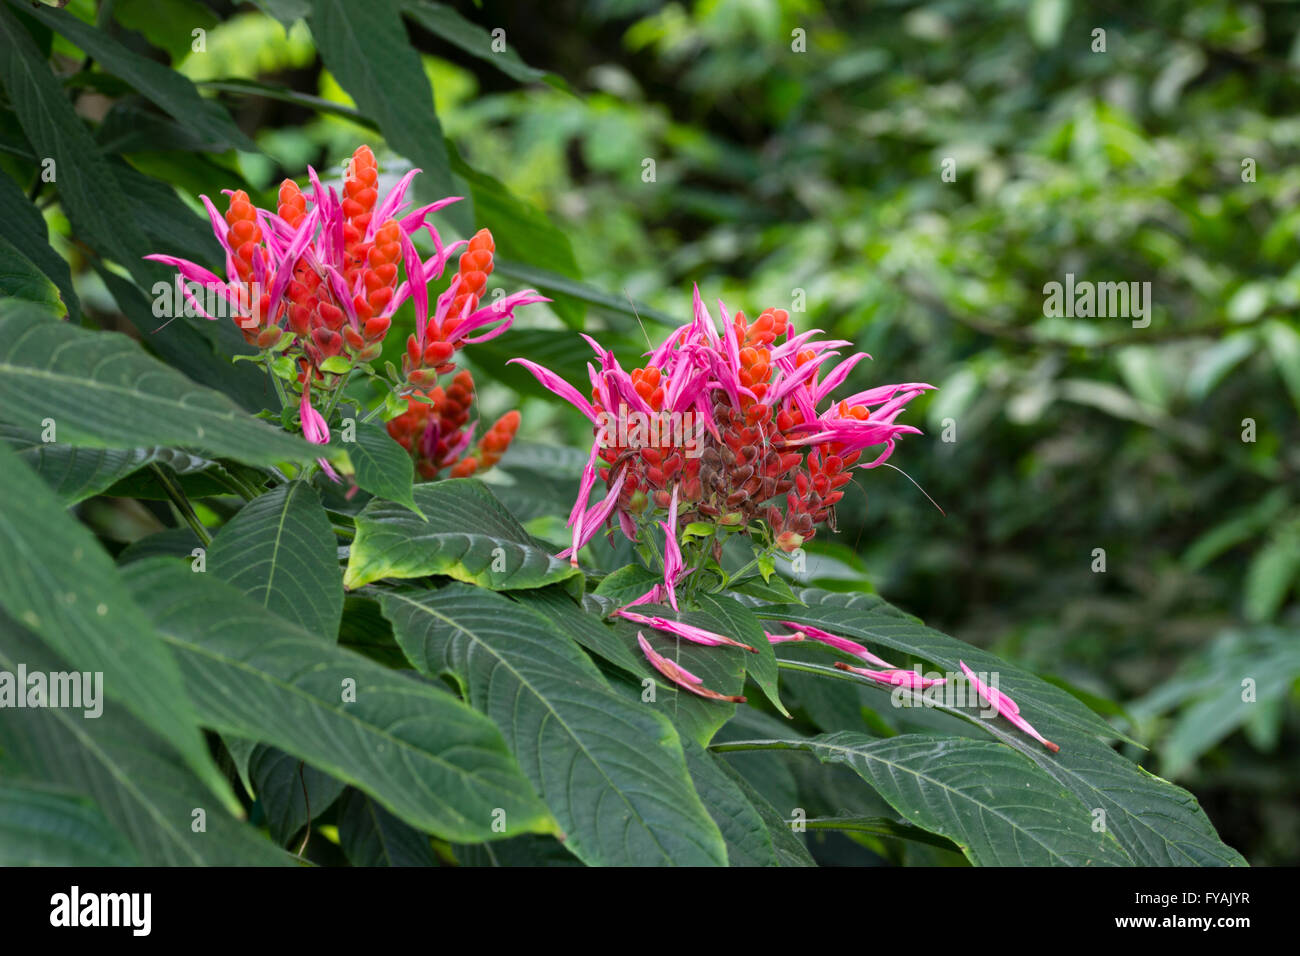 Clustered flower spikes of the tender coral shrimp plant, Aphelandra sinclairiana Stock Photo